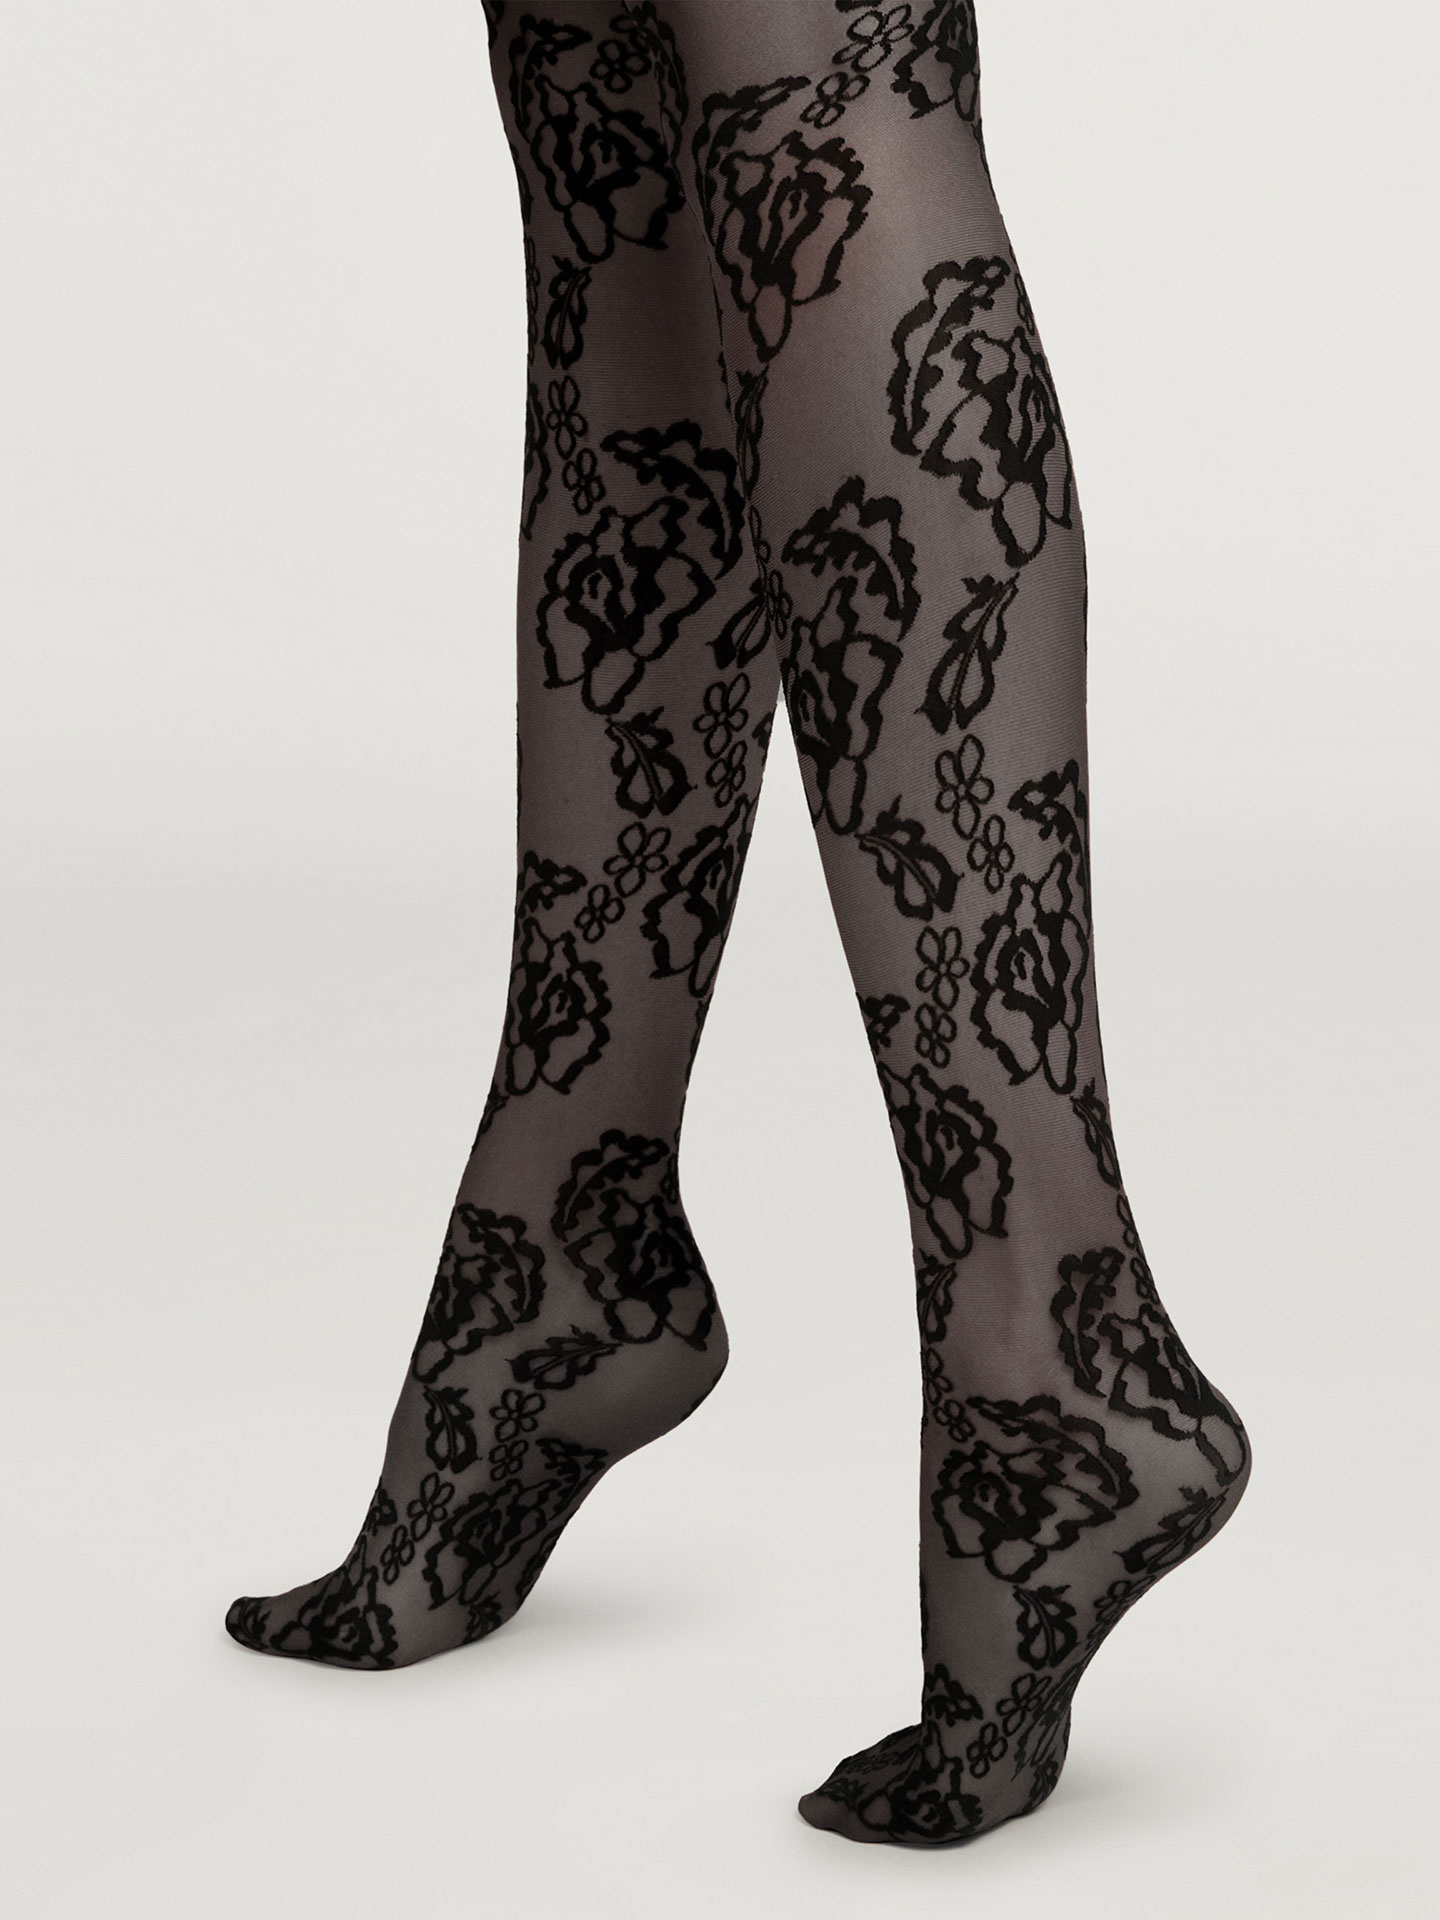 WOLFORD 14889 Doralee Tights